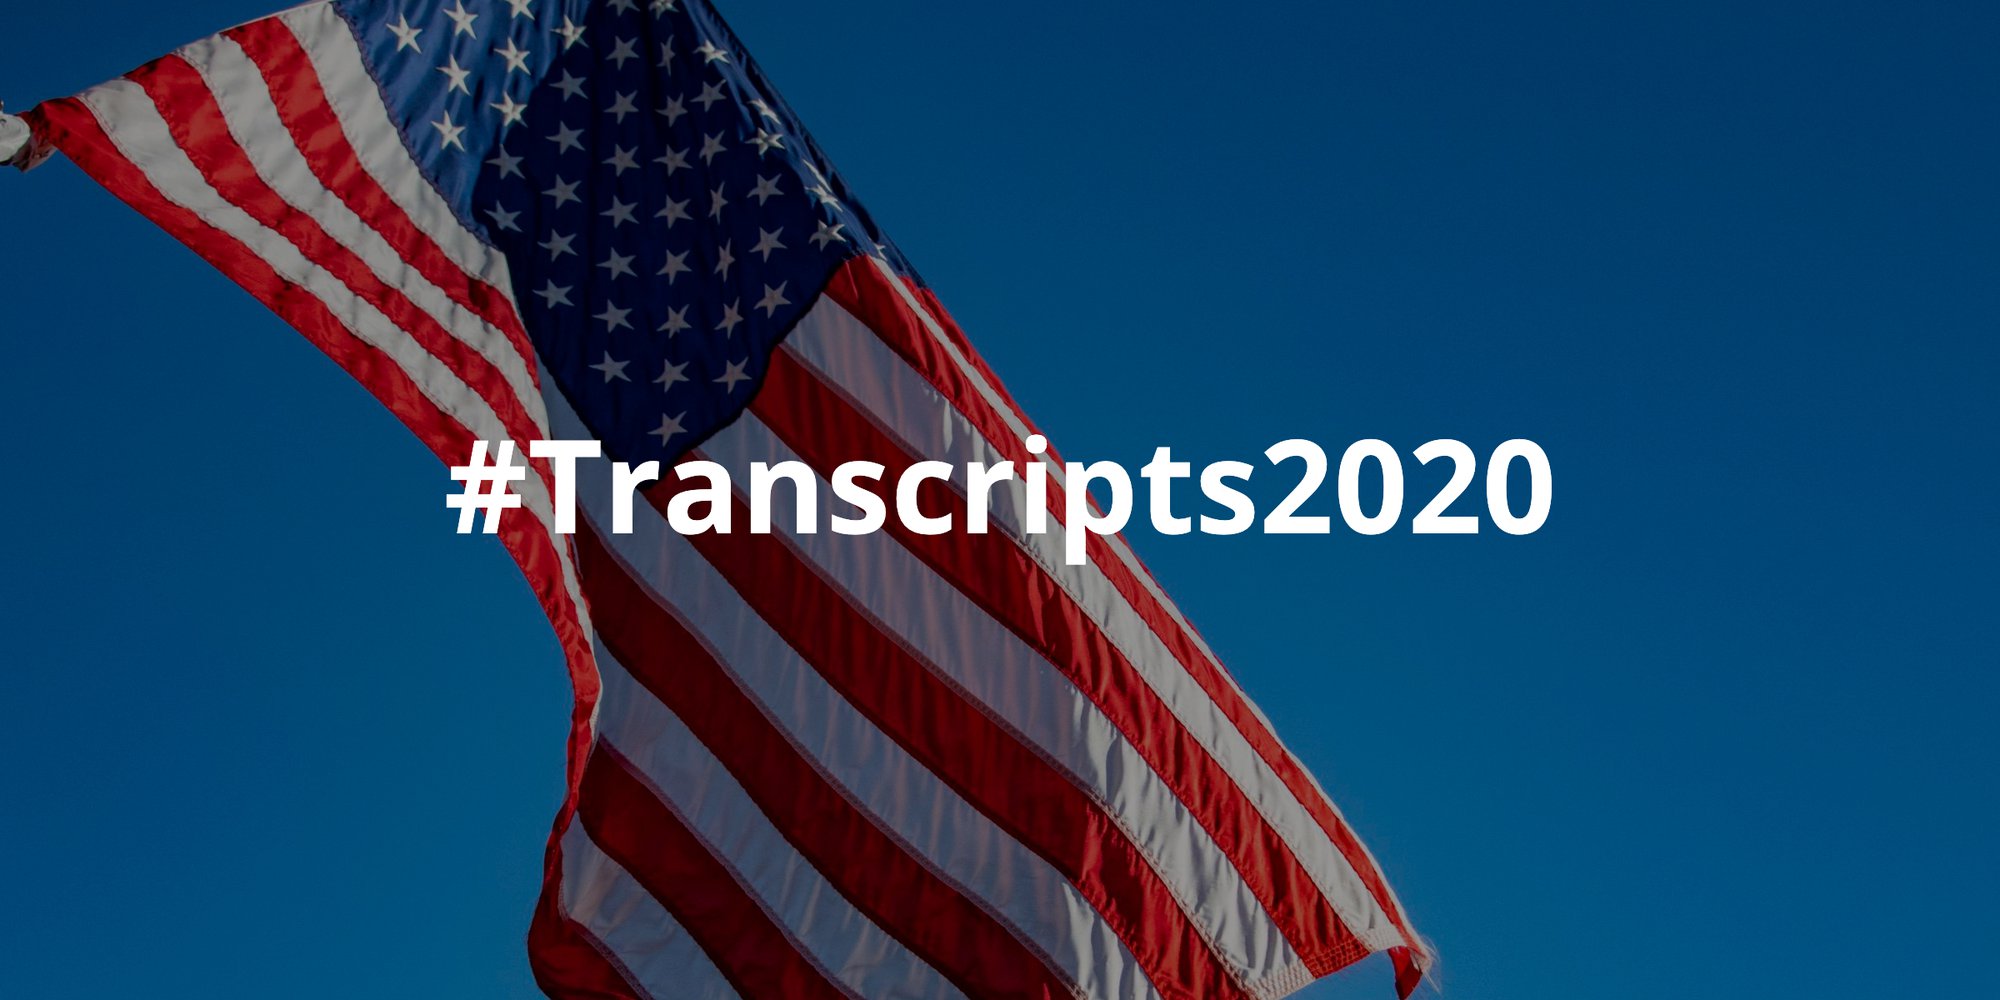 Announcing #Transcripts2020: Scribie’s Transcription Initiative for the 2020 Presidential Elections